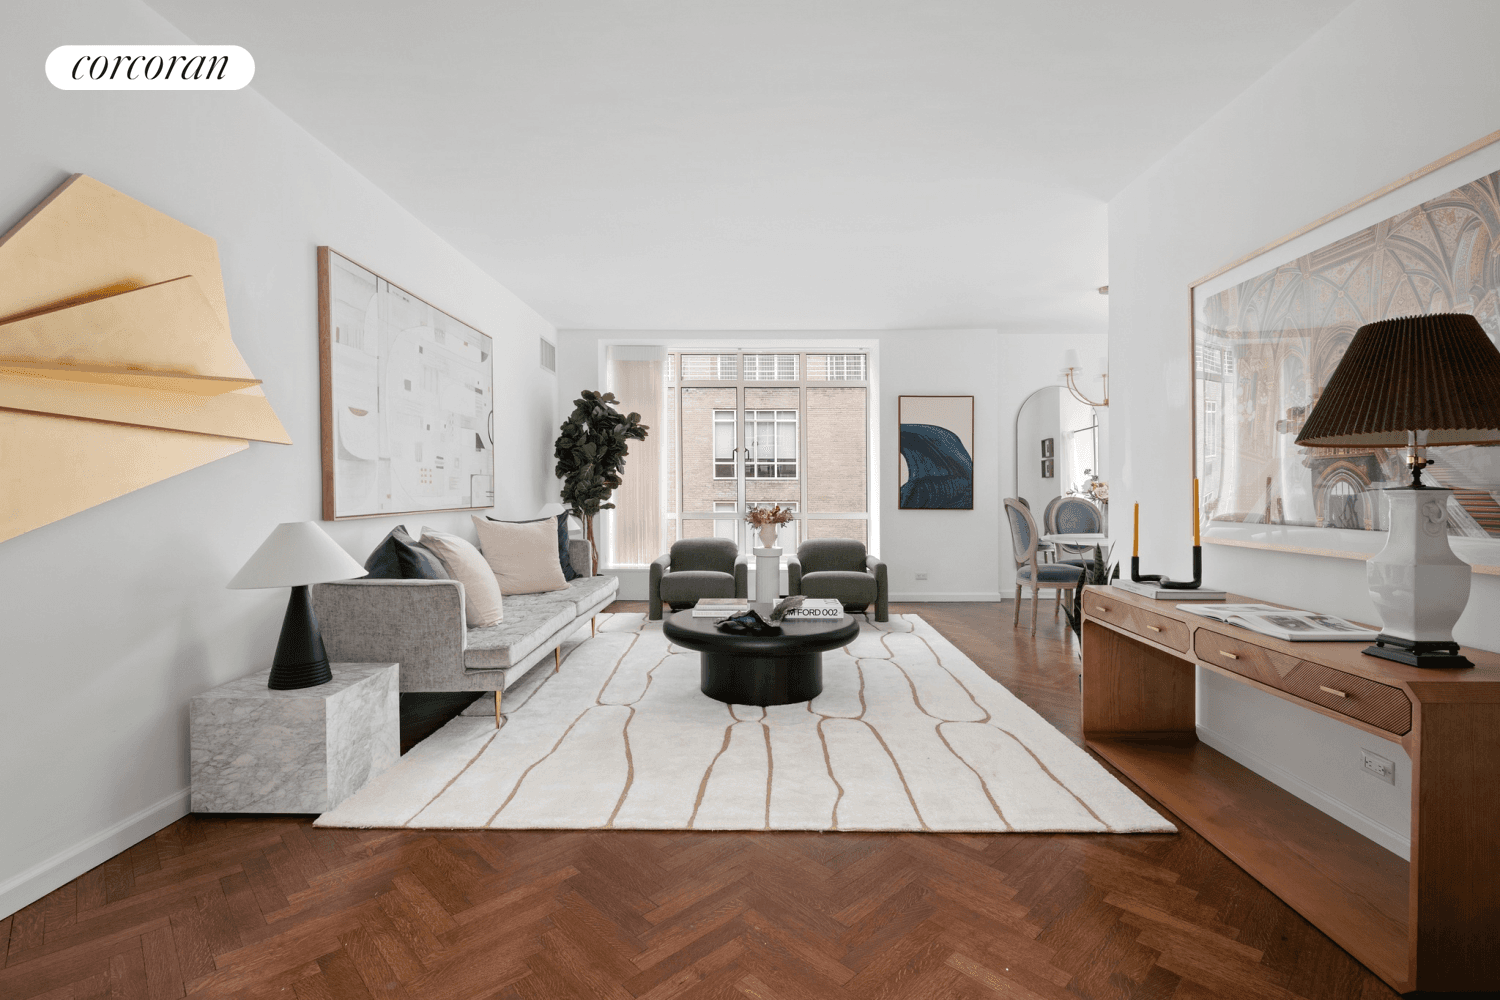 Be transported to the golden age of old New York in this picture perfect one bedroom, Apartment 10F at 17 East 54th Street, part of the renowned1936 Landmarked Rockefeller Apartments ...